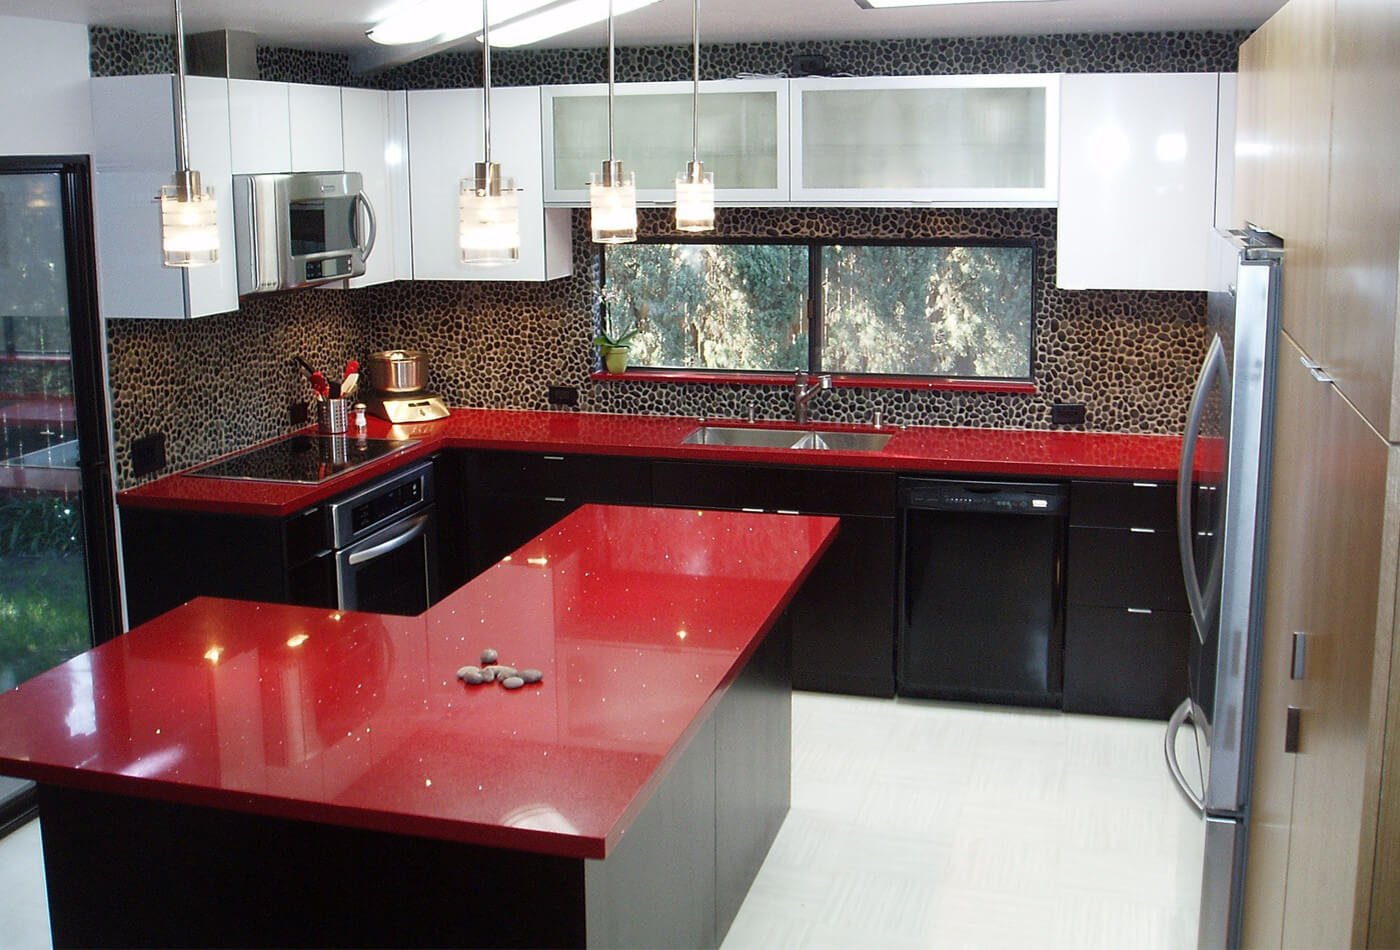 https://dropinblog.net/34246798/files/featured/Designing_With_Red_Countertops.jpg